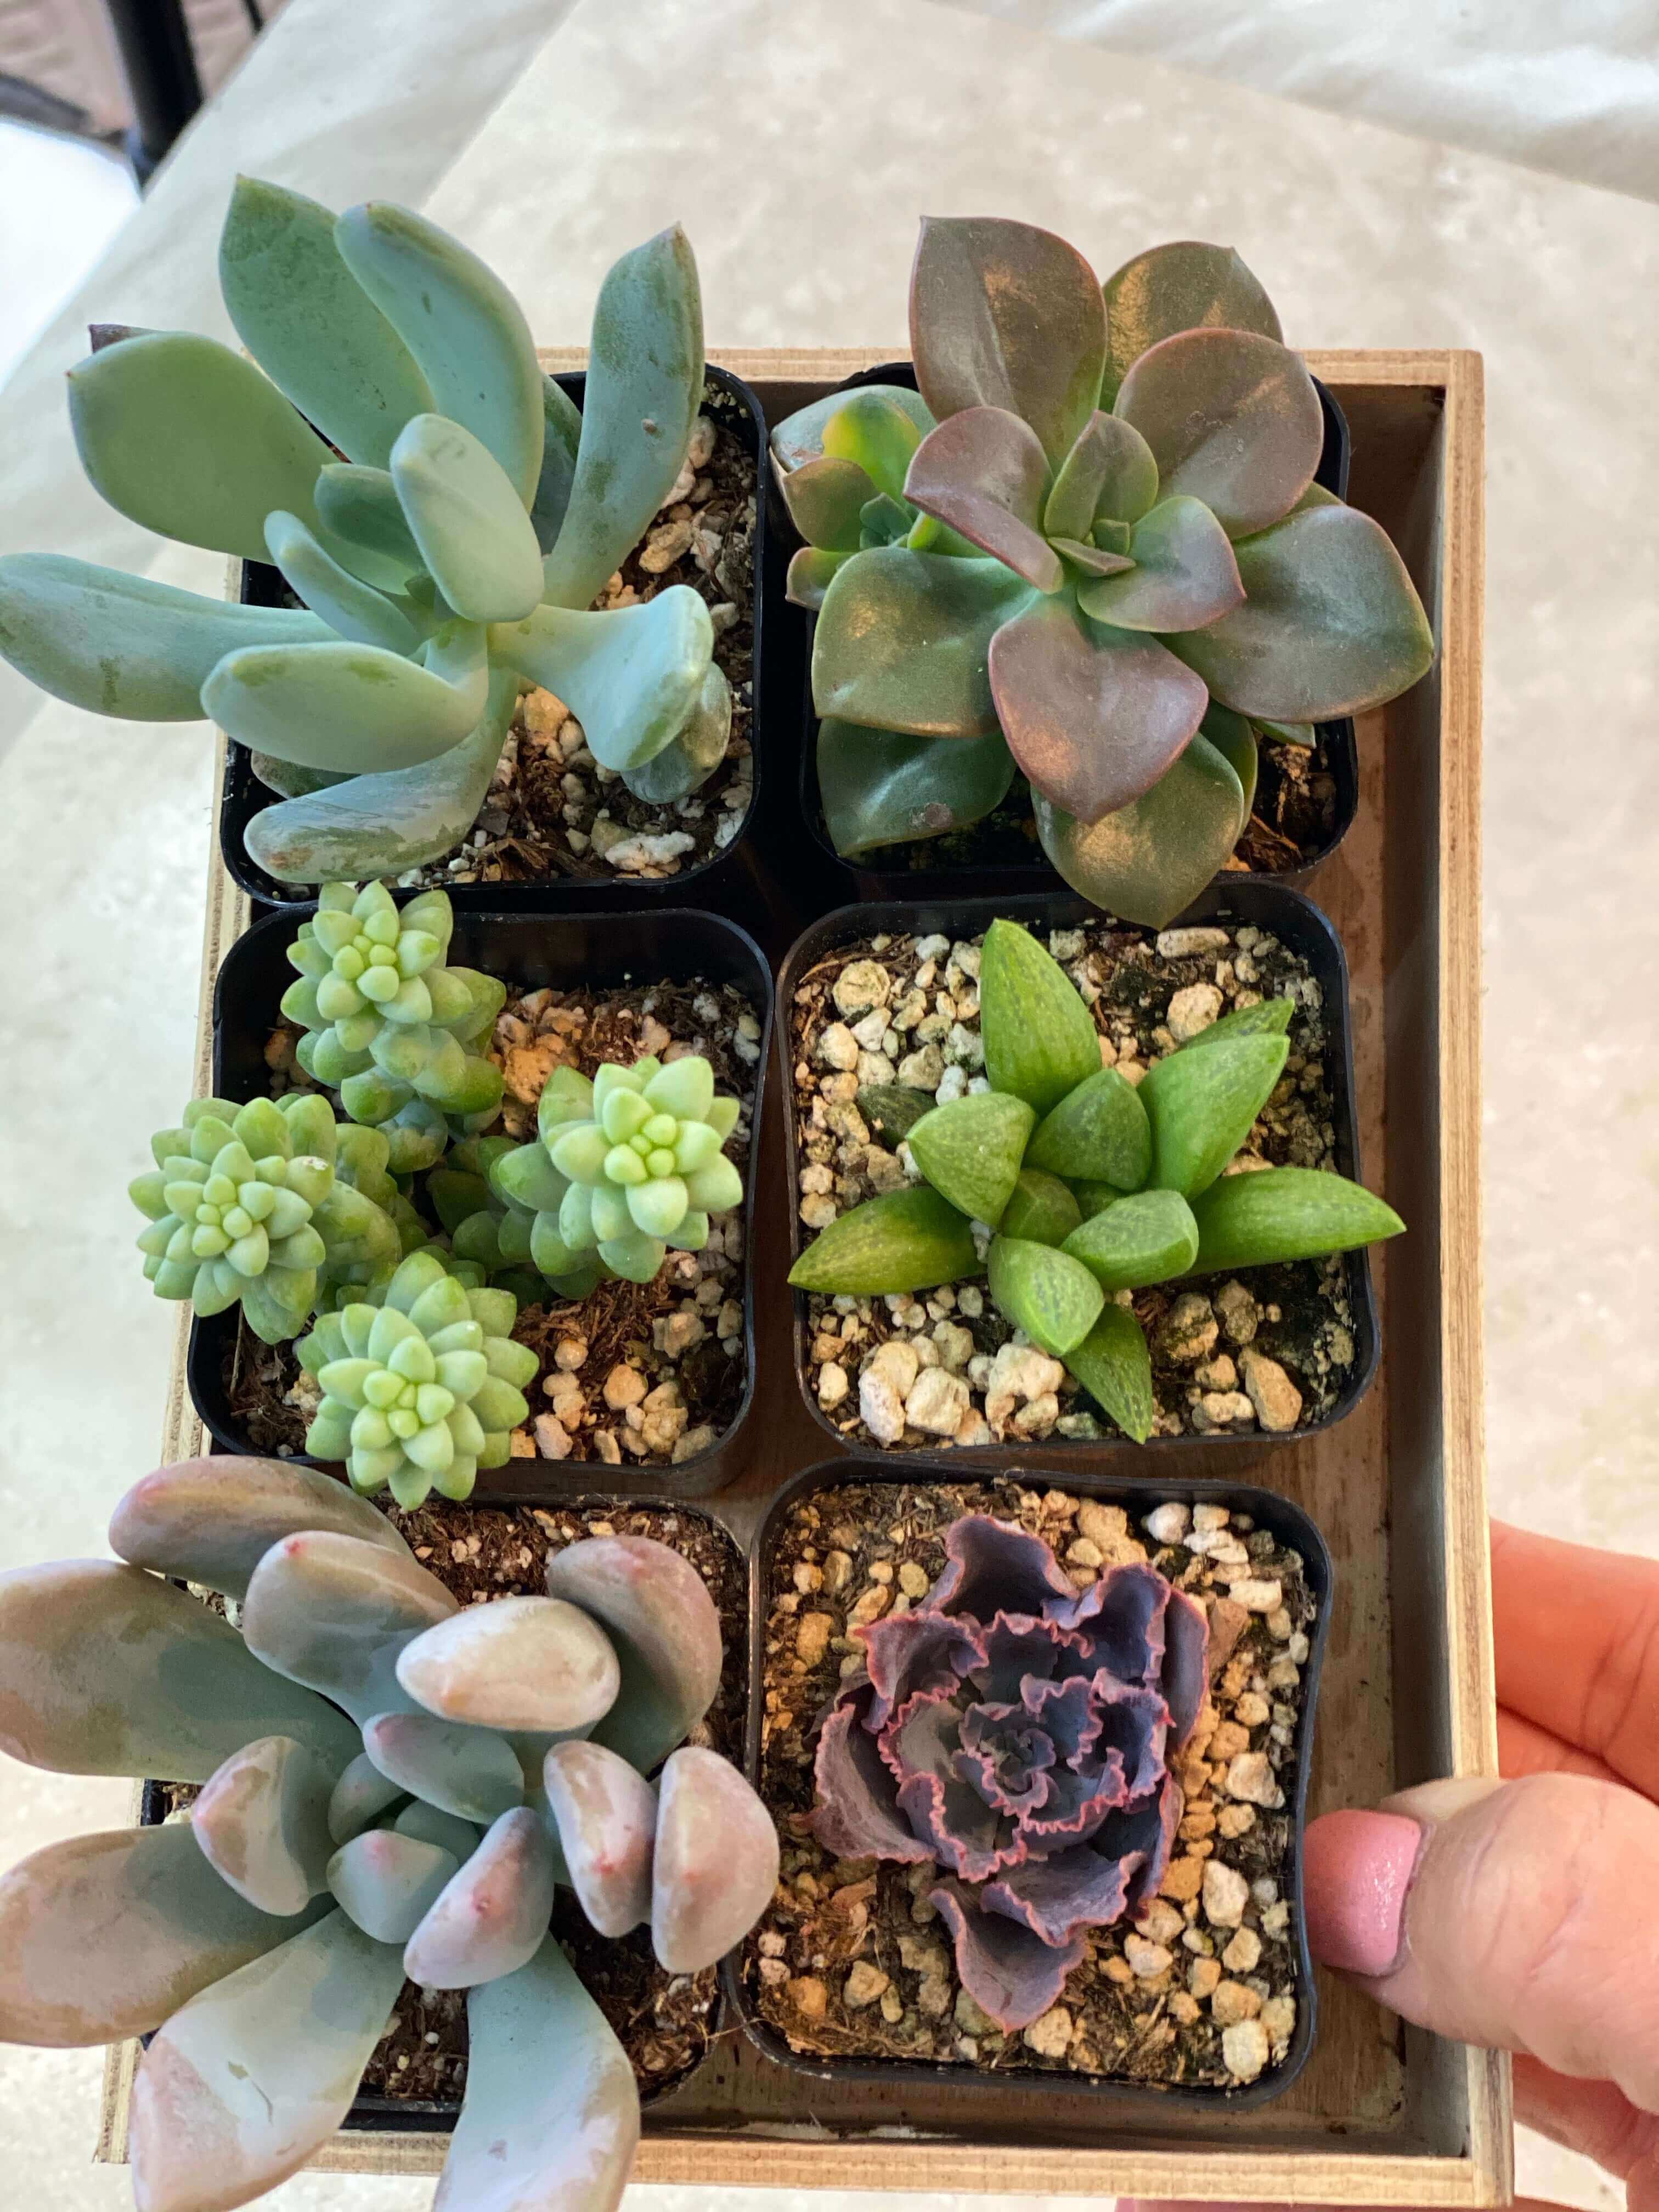 Diverse group of 2-inch succulents showing various growth forms and coloration, ideal for small spaces.